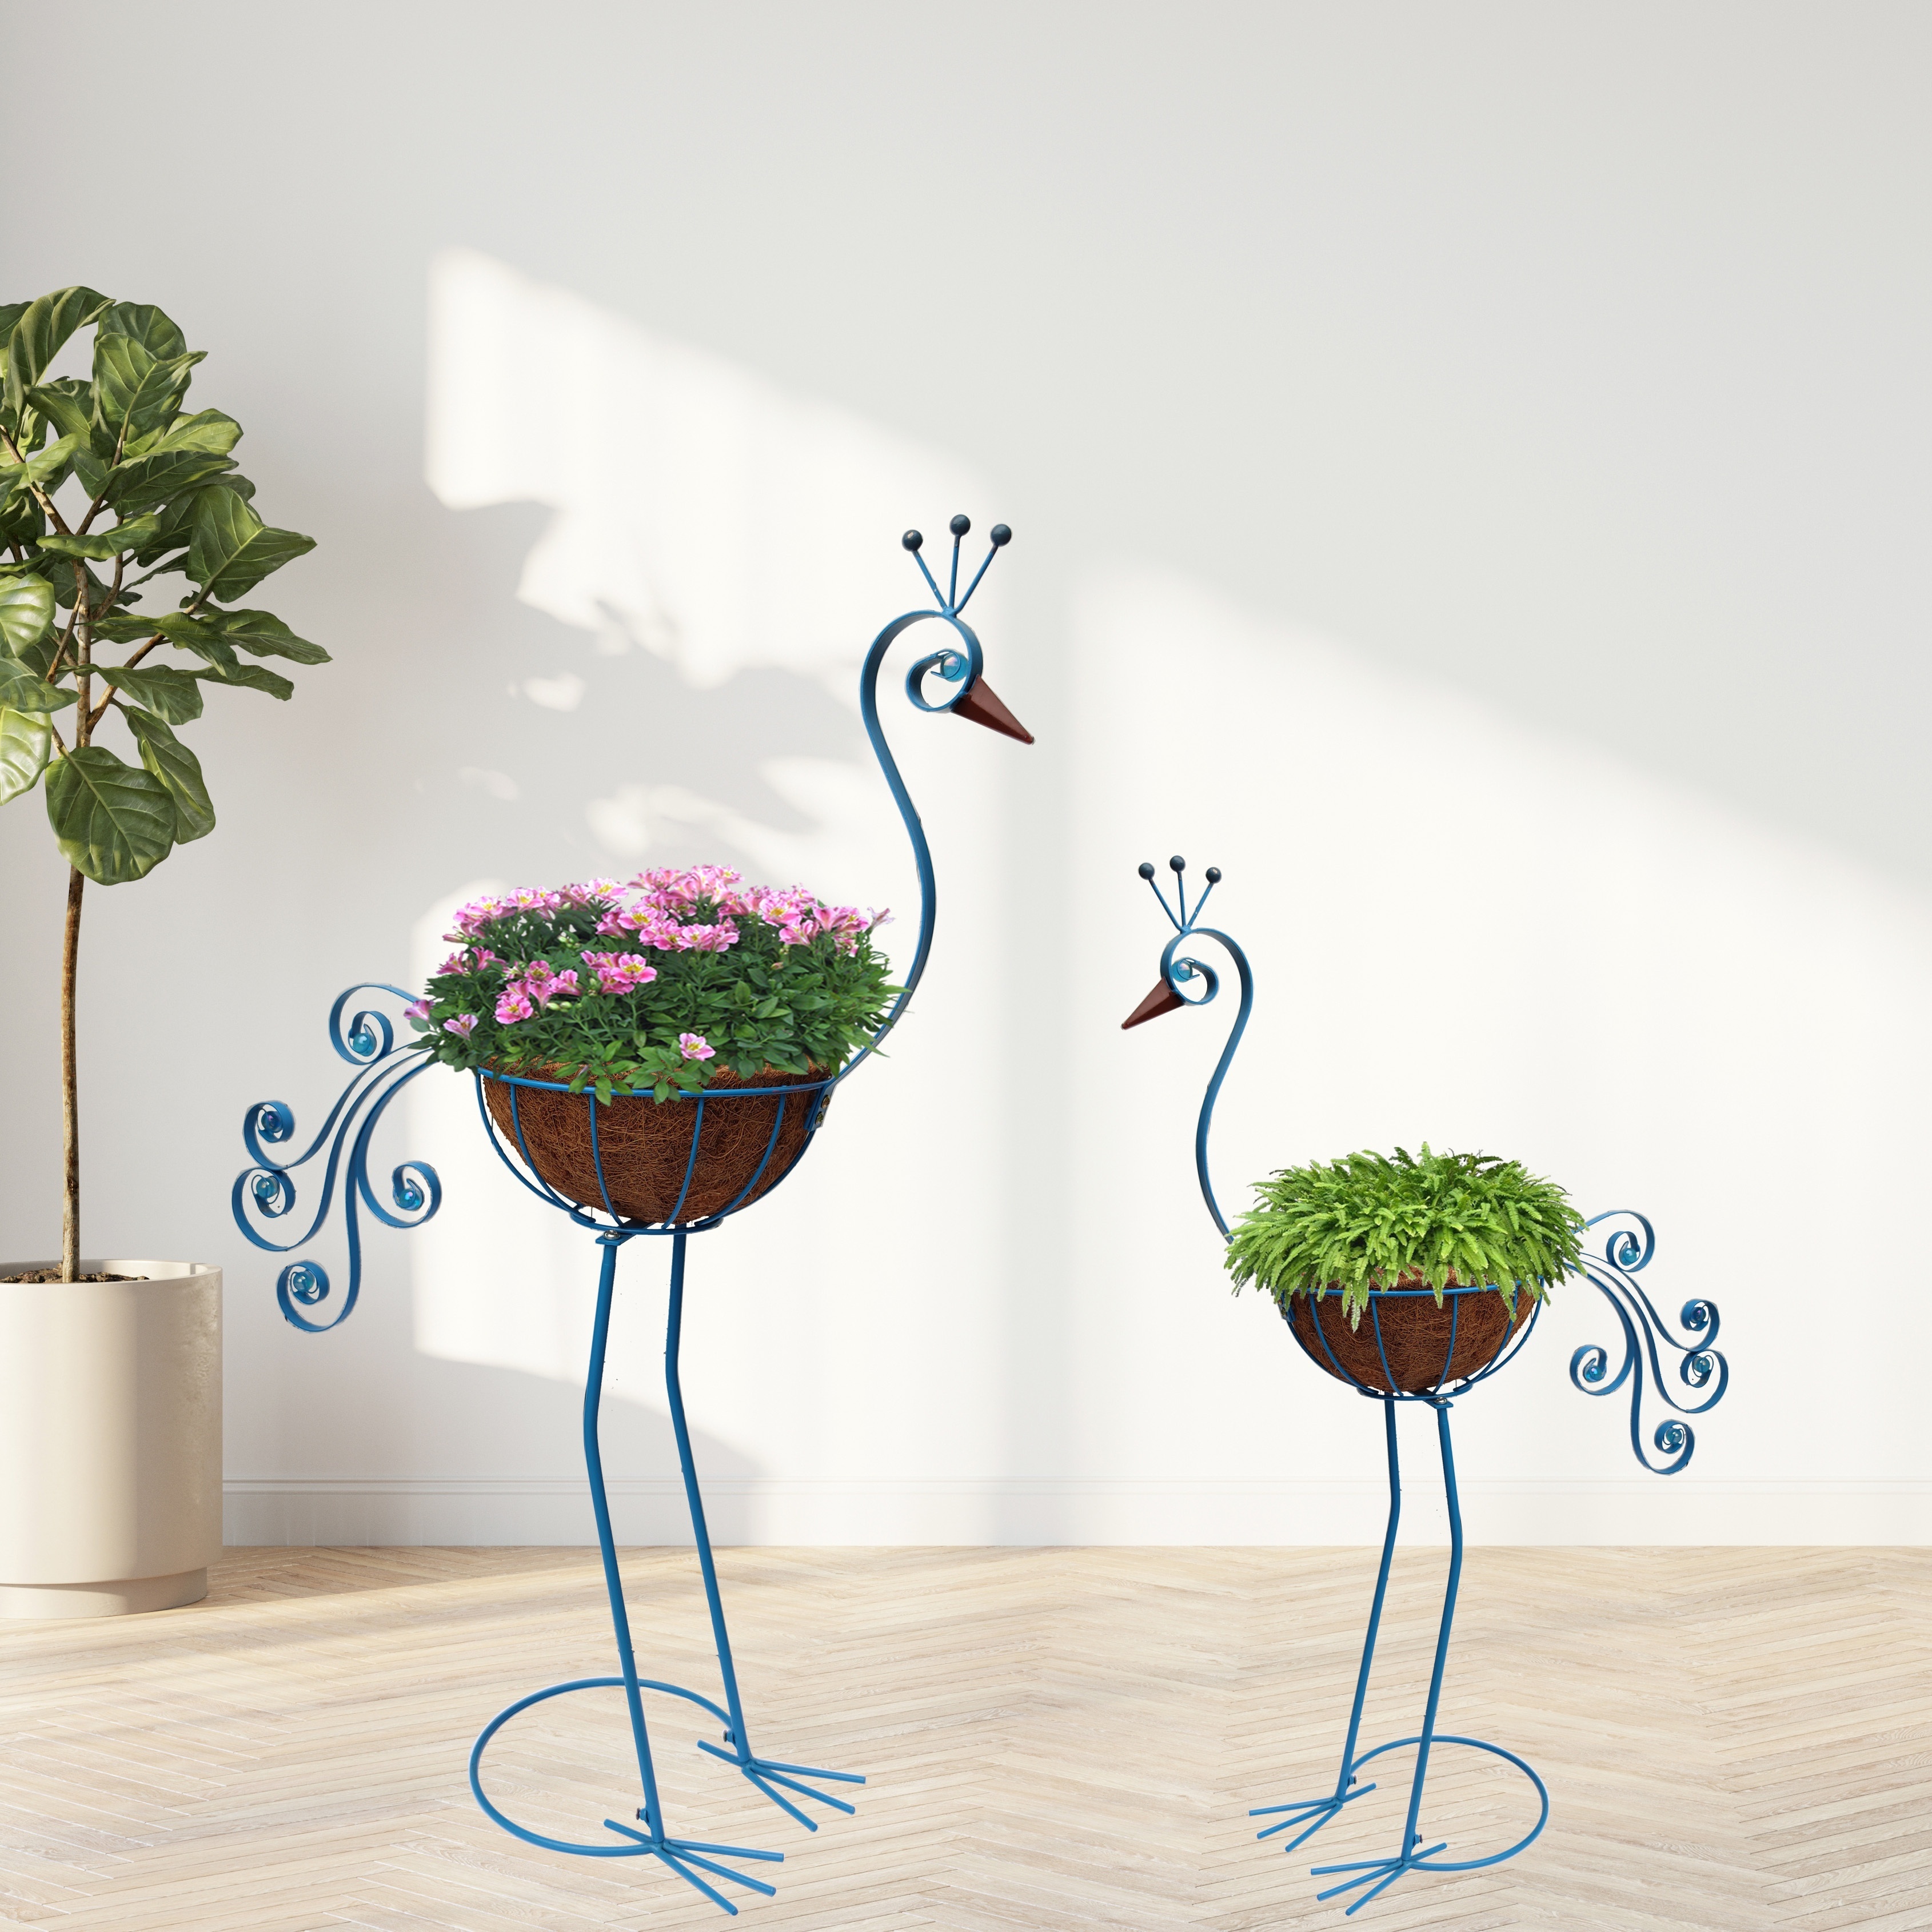  Euiroet Peacock Decor Flower Pot,Metal Flower Pot,Outdoor  Flower Planters,Animal Succulent Flower Pot,Decorative Fun Planter for  Cactus and Air Plants for Indoor/Outdoor Use,Perfect Gardening Gifts :  Patio, Lawn & Garden